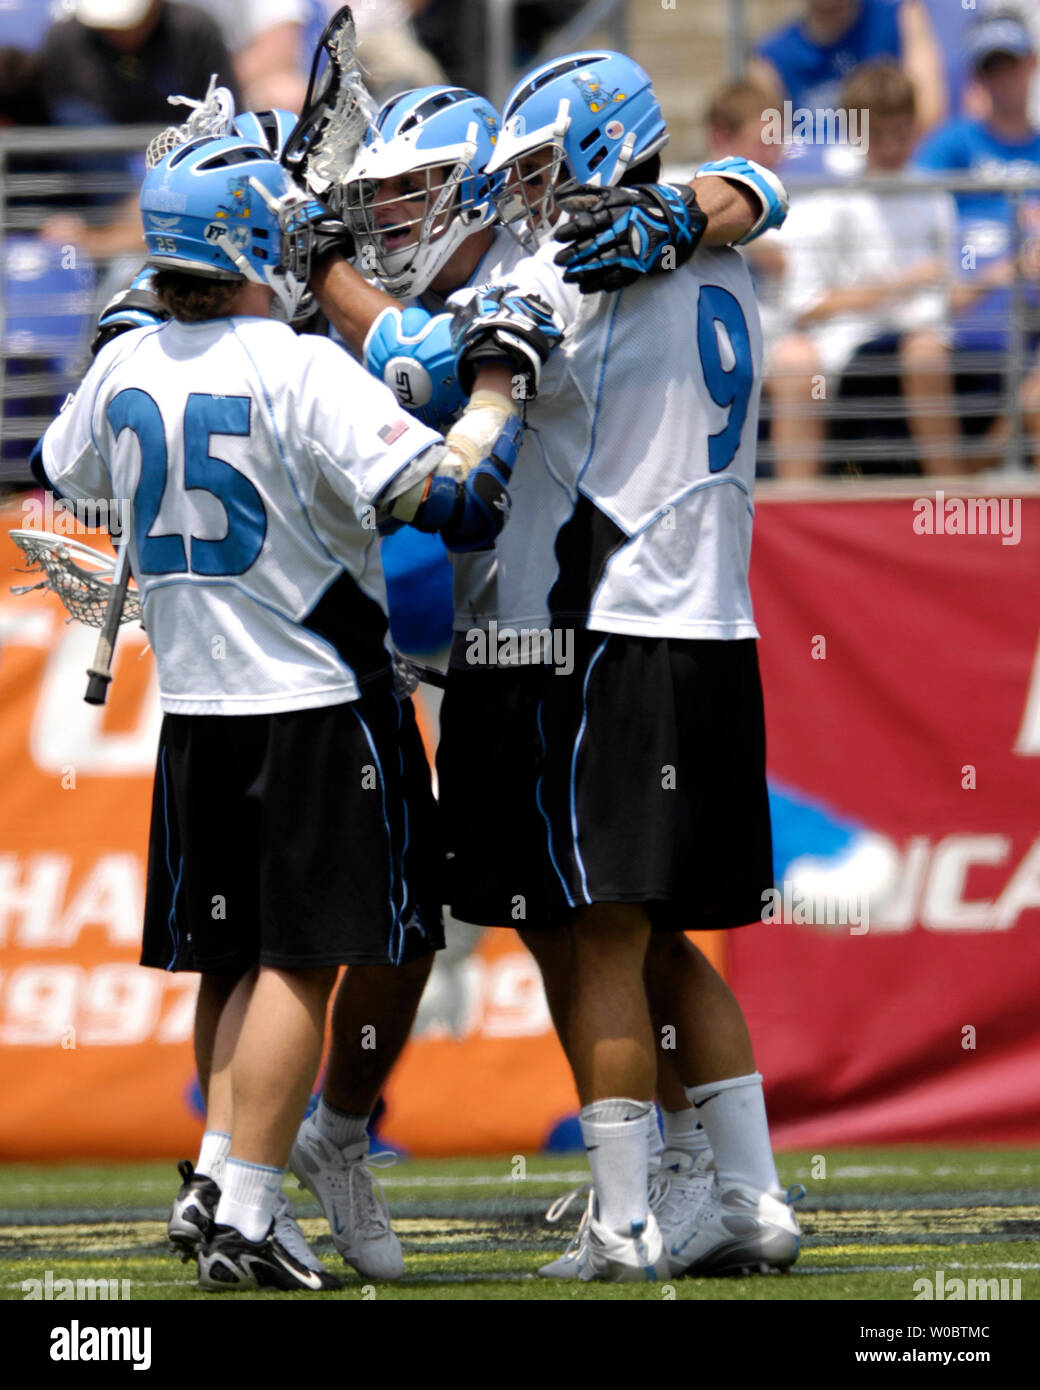 Johns Hopkins University Blue Jays Stephen Peyser (c) is congratulated by Jake Byrne (25) and Paul Rabil (9) after scoring a goal in the fourth quarter against the Delaware Blue Hens in the semi-final of the NCAA Division I lacrosse championship at M&T Bank Stadium in Baltimore, Maryland on May 26, 2007.   Johns Hopkins defeated Delaware 8-3 to move to the lacrosse championship.   (UPI Photo/ Mark Goldman) Stock Photo